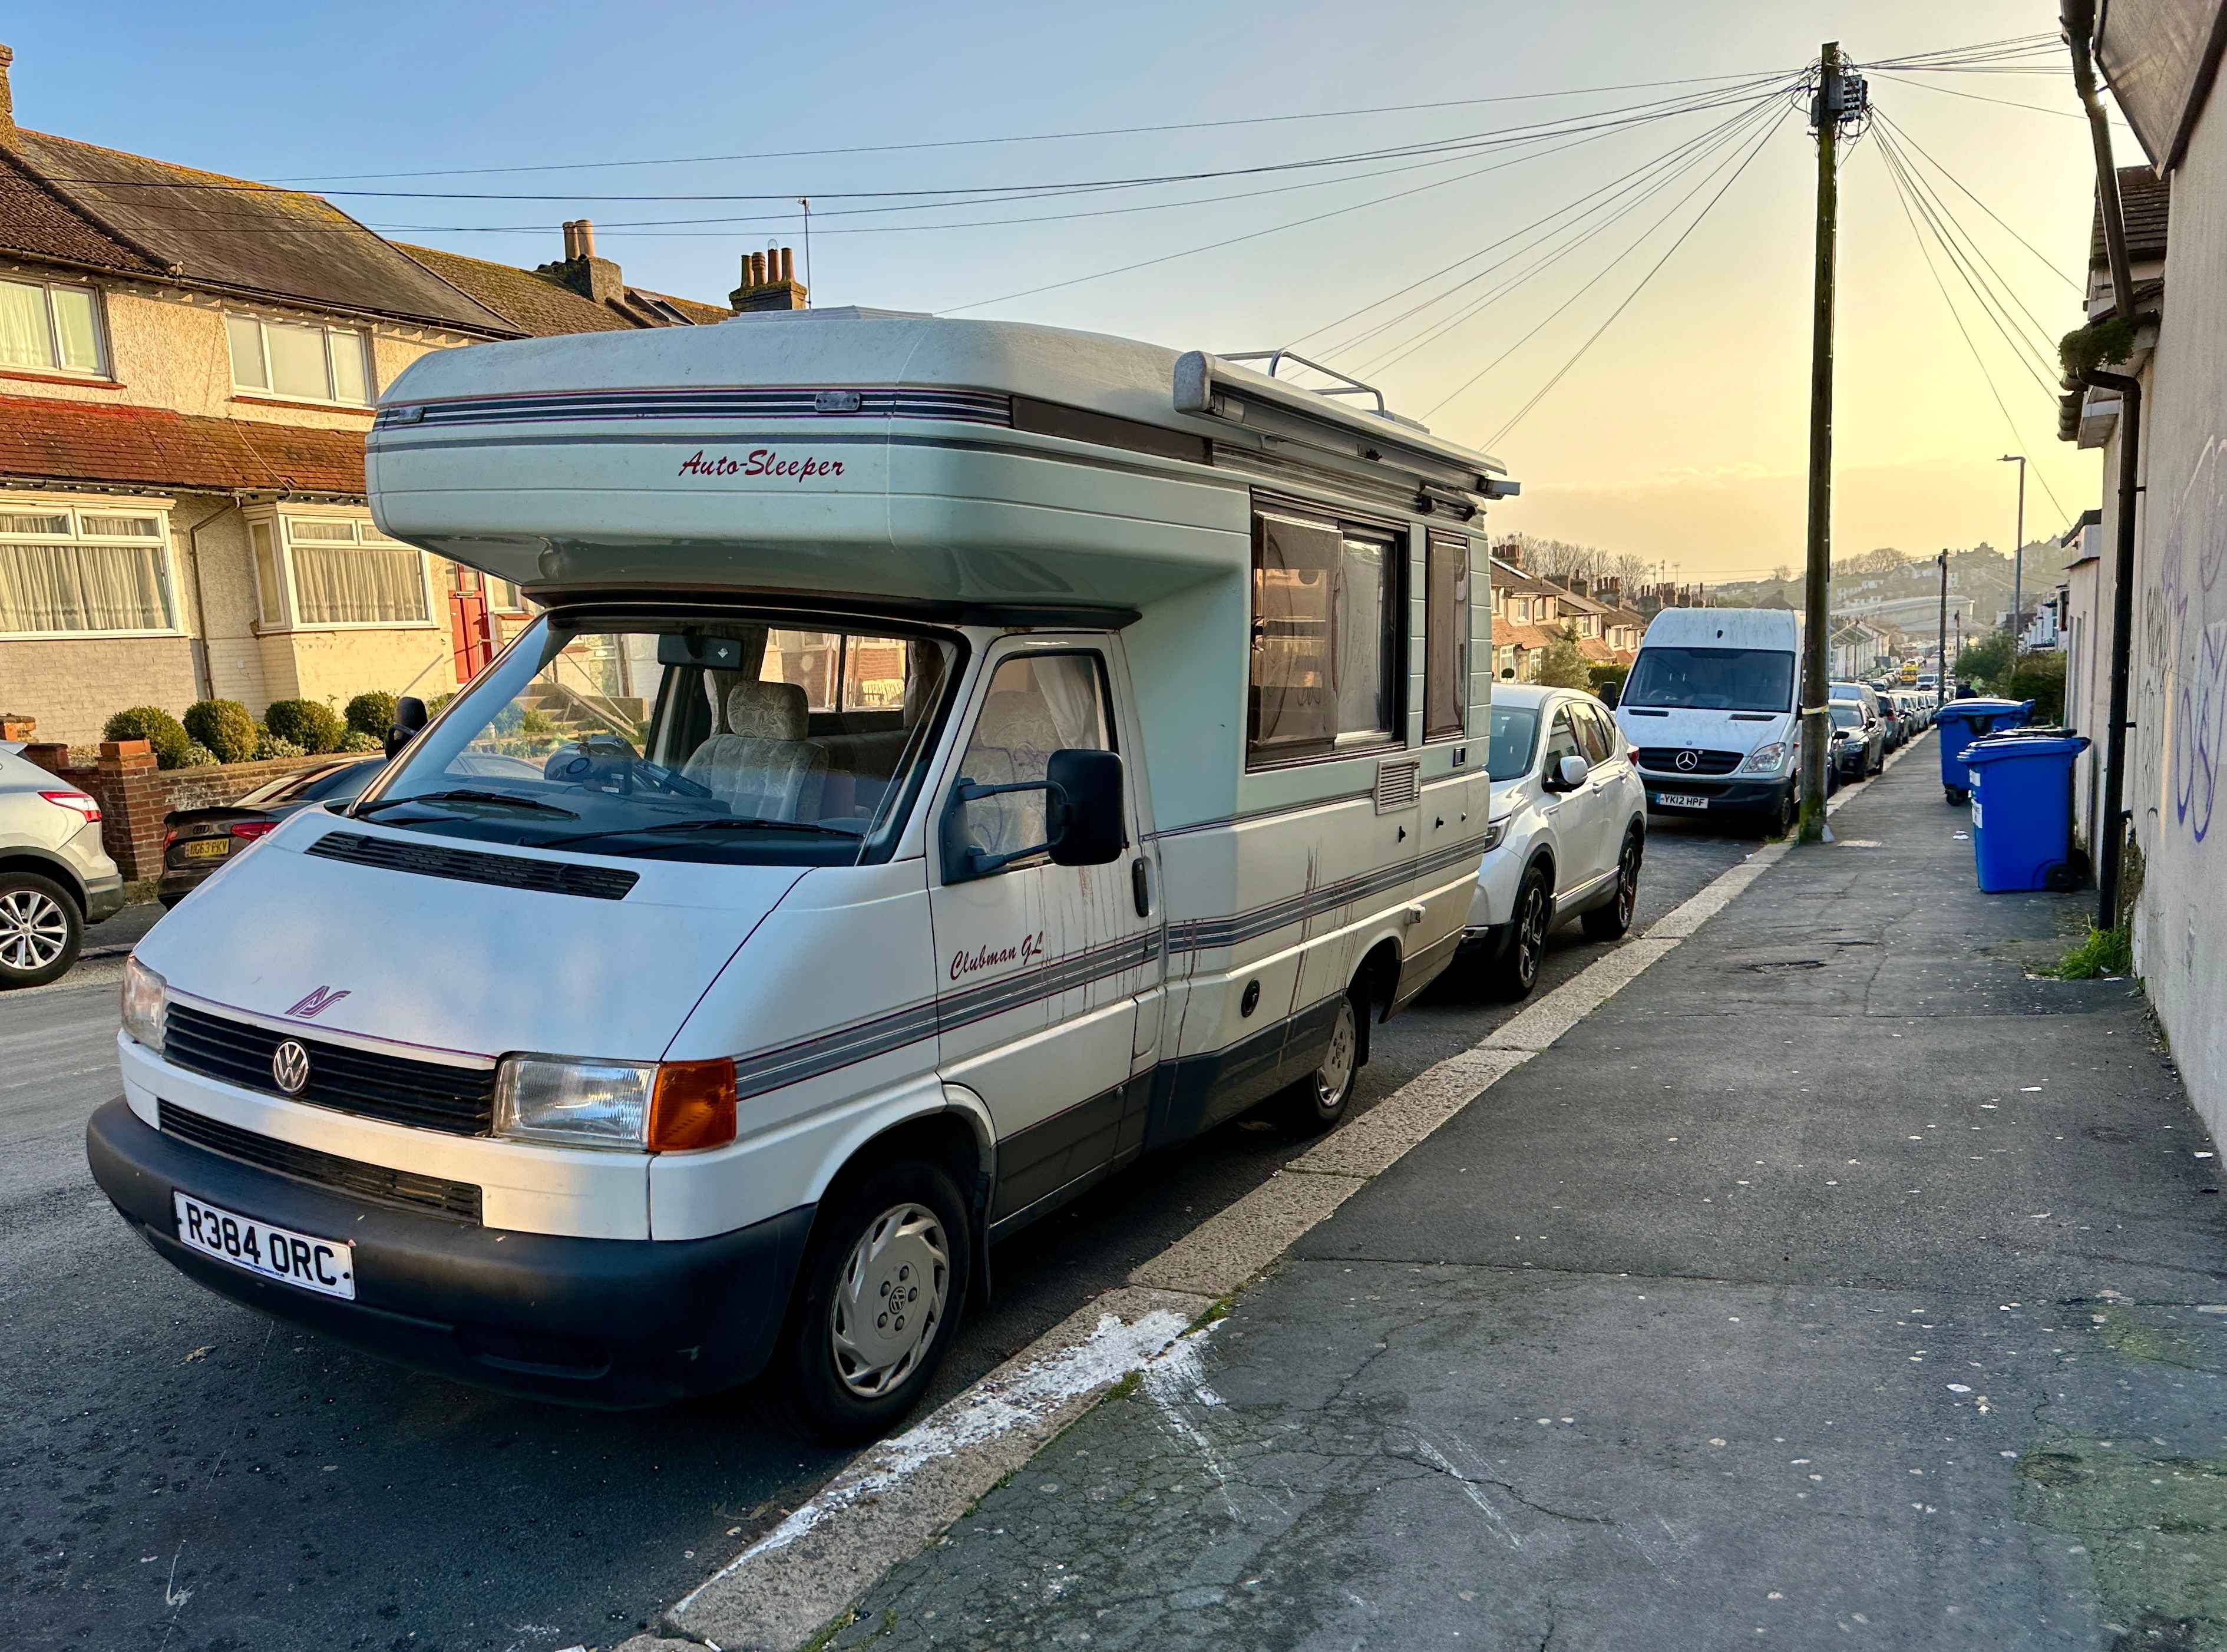 Photograph of R384 ORC - a Beige Volkswagen Transporter camper van parked in Hollingdean by a non-resident, and potentially abandoned. The eleventh of twelve photographs supplied by the residents of Hollingdean.